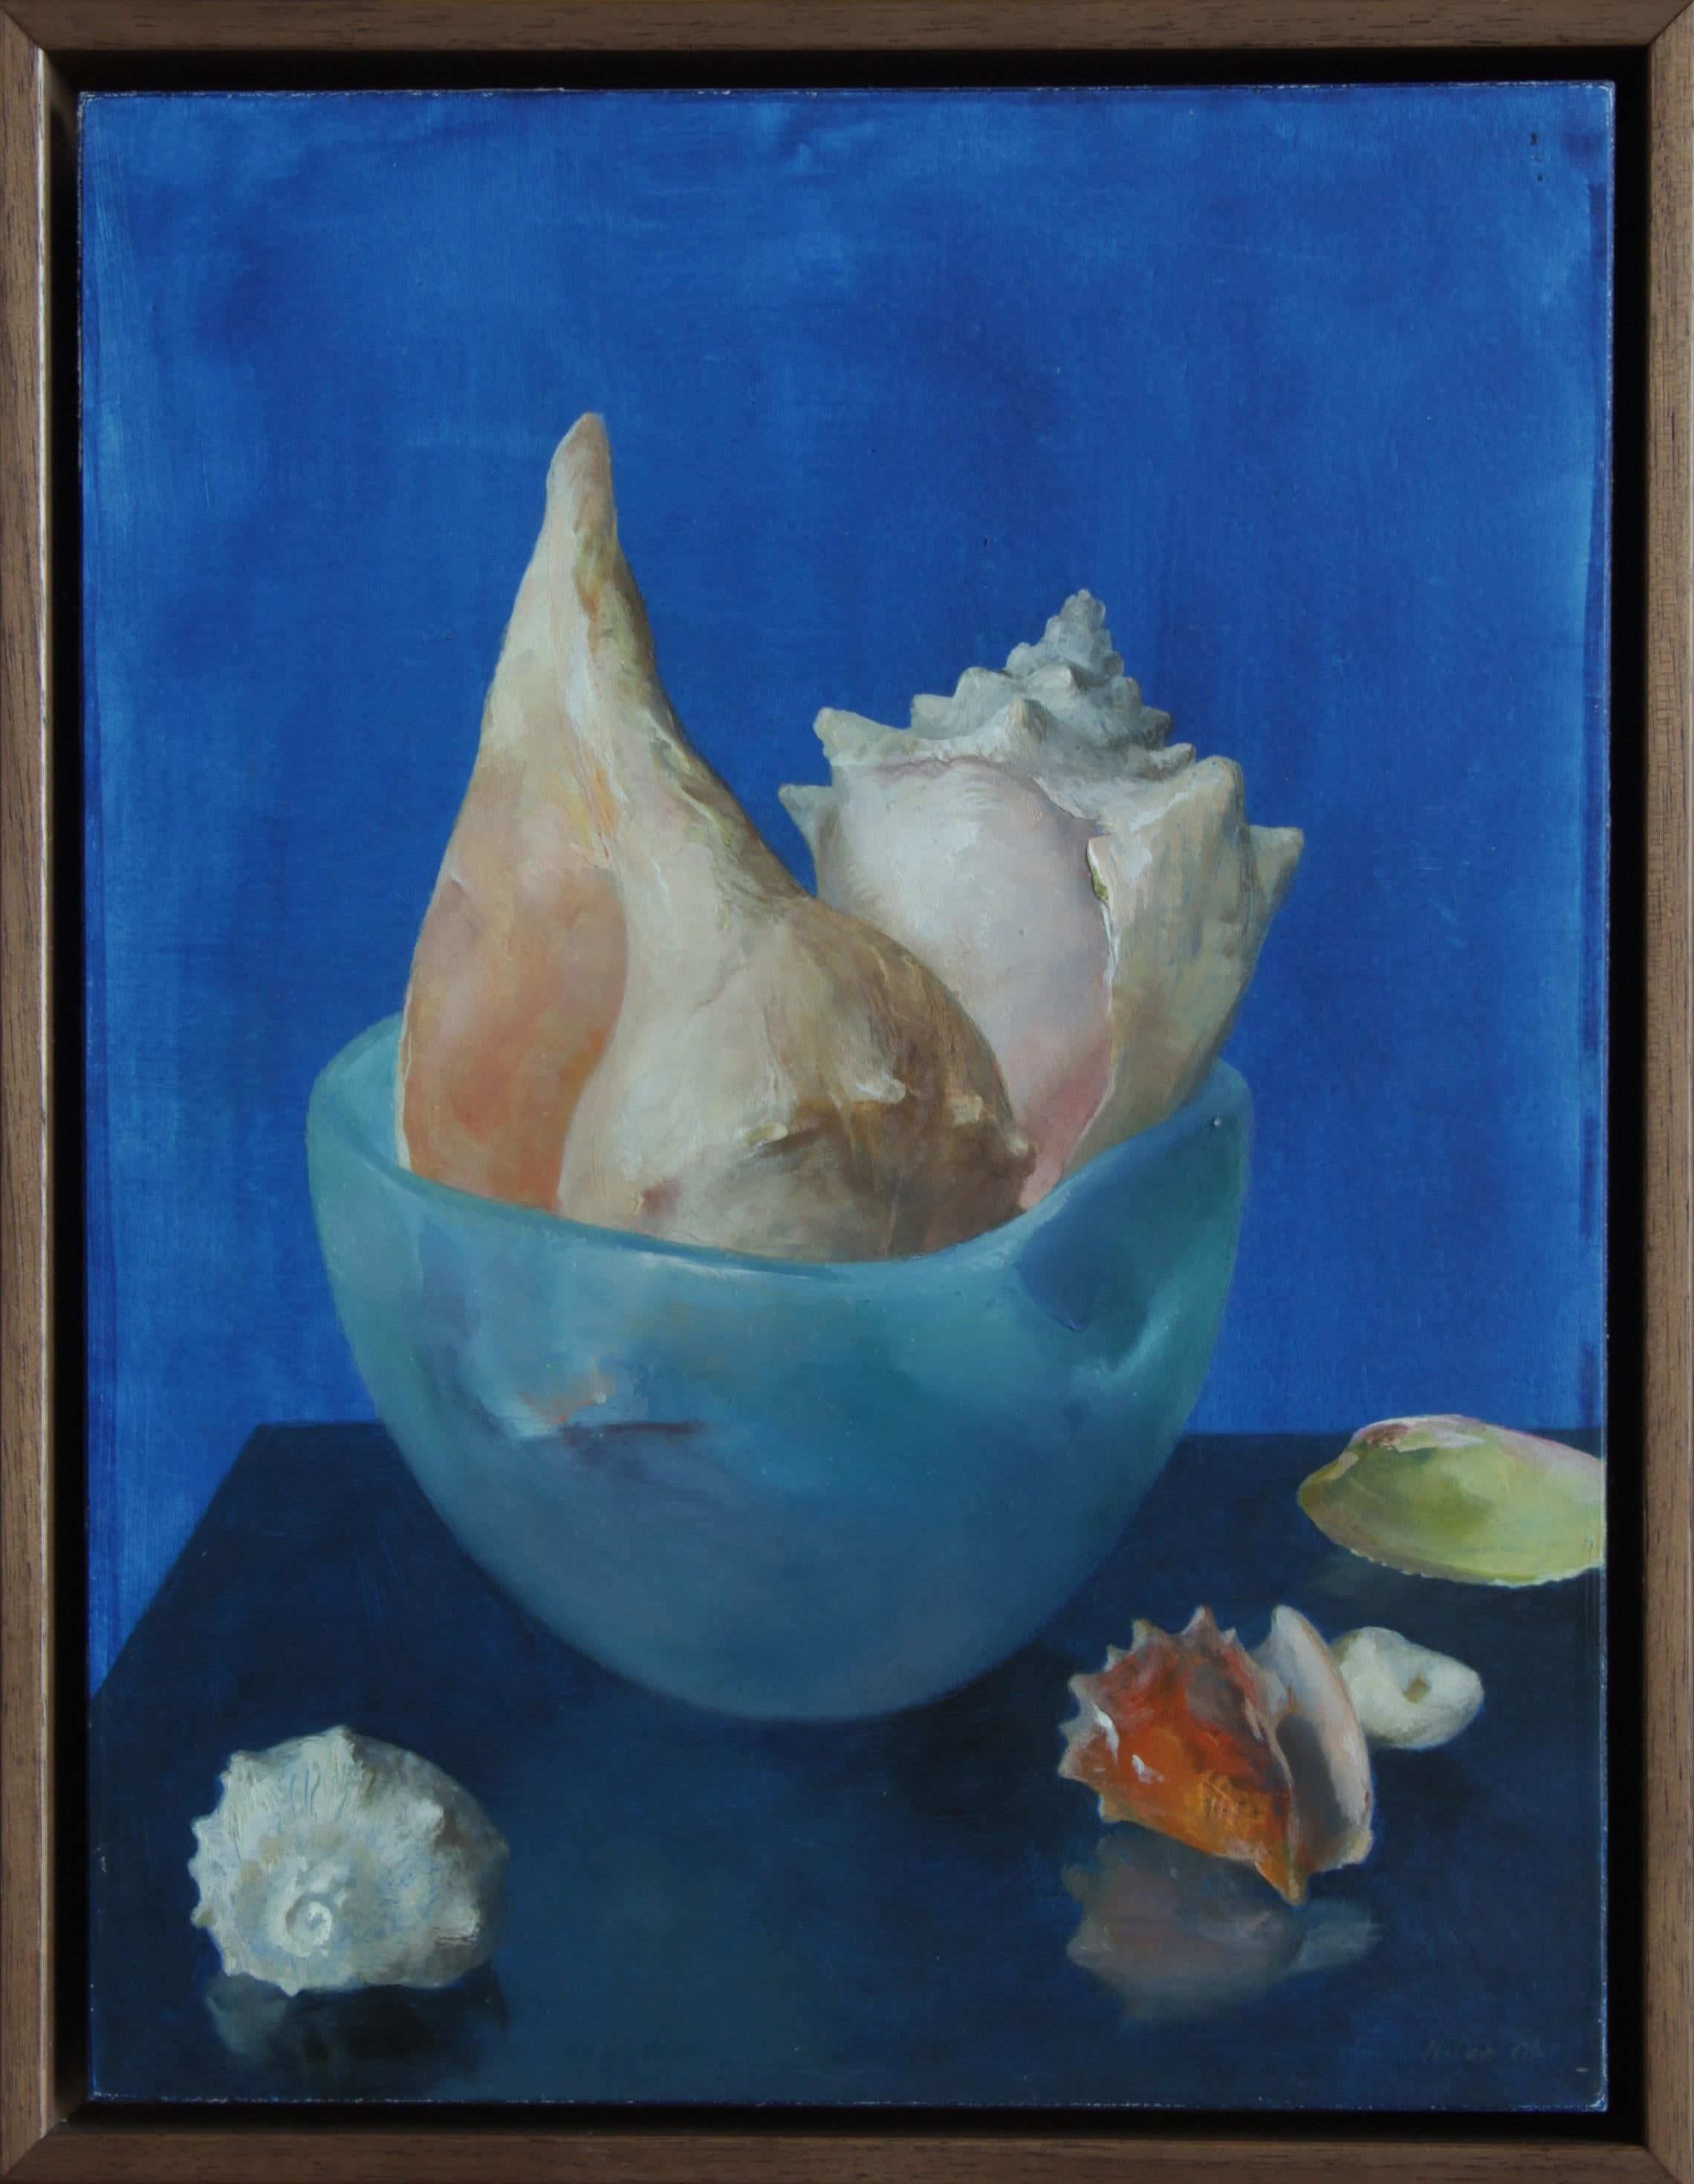 This delicately rendered painting presents the viewer with a study in contrasts. A collection of 6 seashells are arranged in a setting with three differing shades of blue. The shells are arranged, some in the ceramic glazed bowl and some sitting